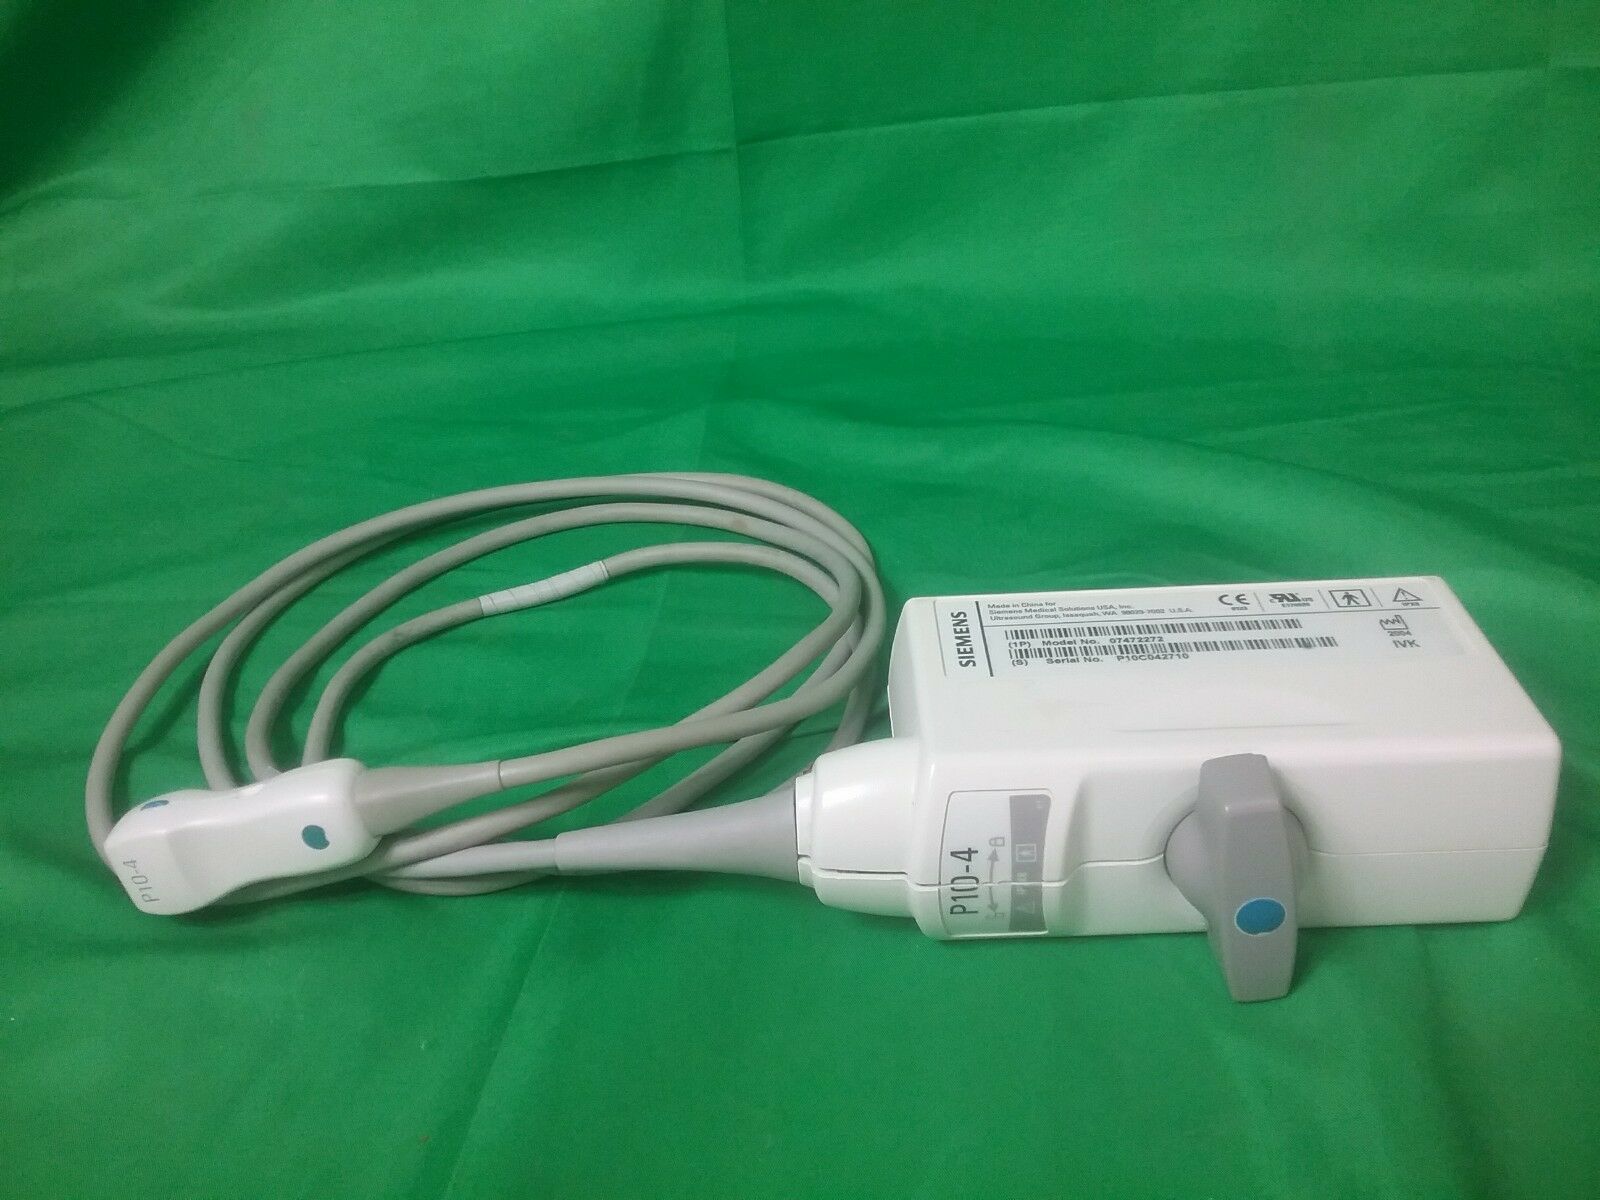 Siemens P10-4 Ultrasound Transducer For Acuson Antares DIAGNOSTIC ULTRASOUND MACHINES FOR SALE